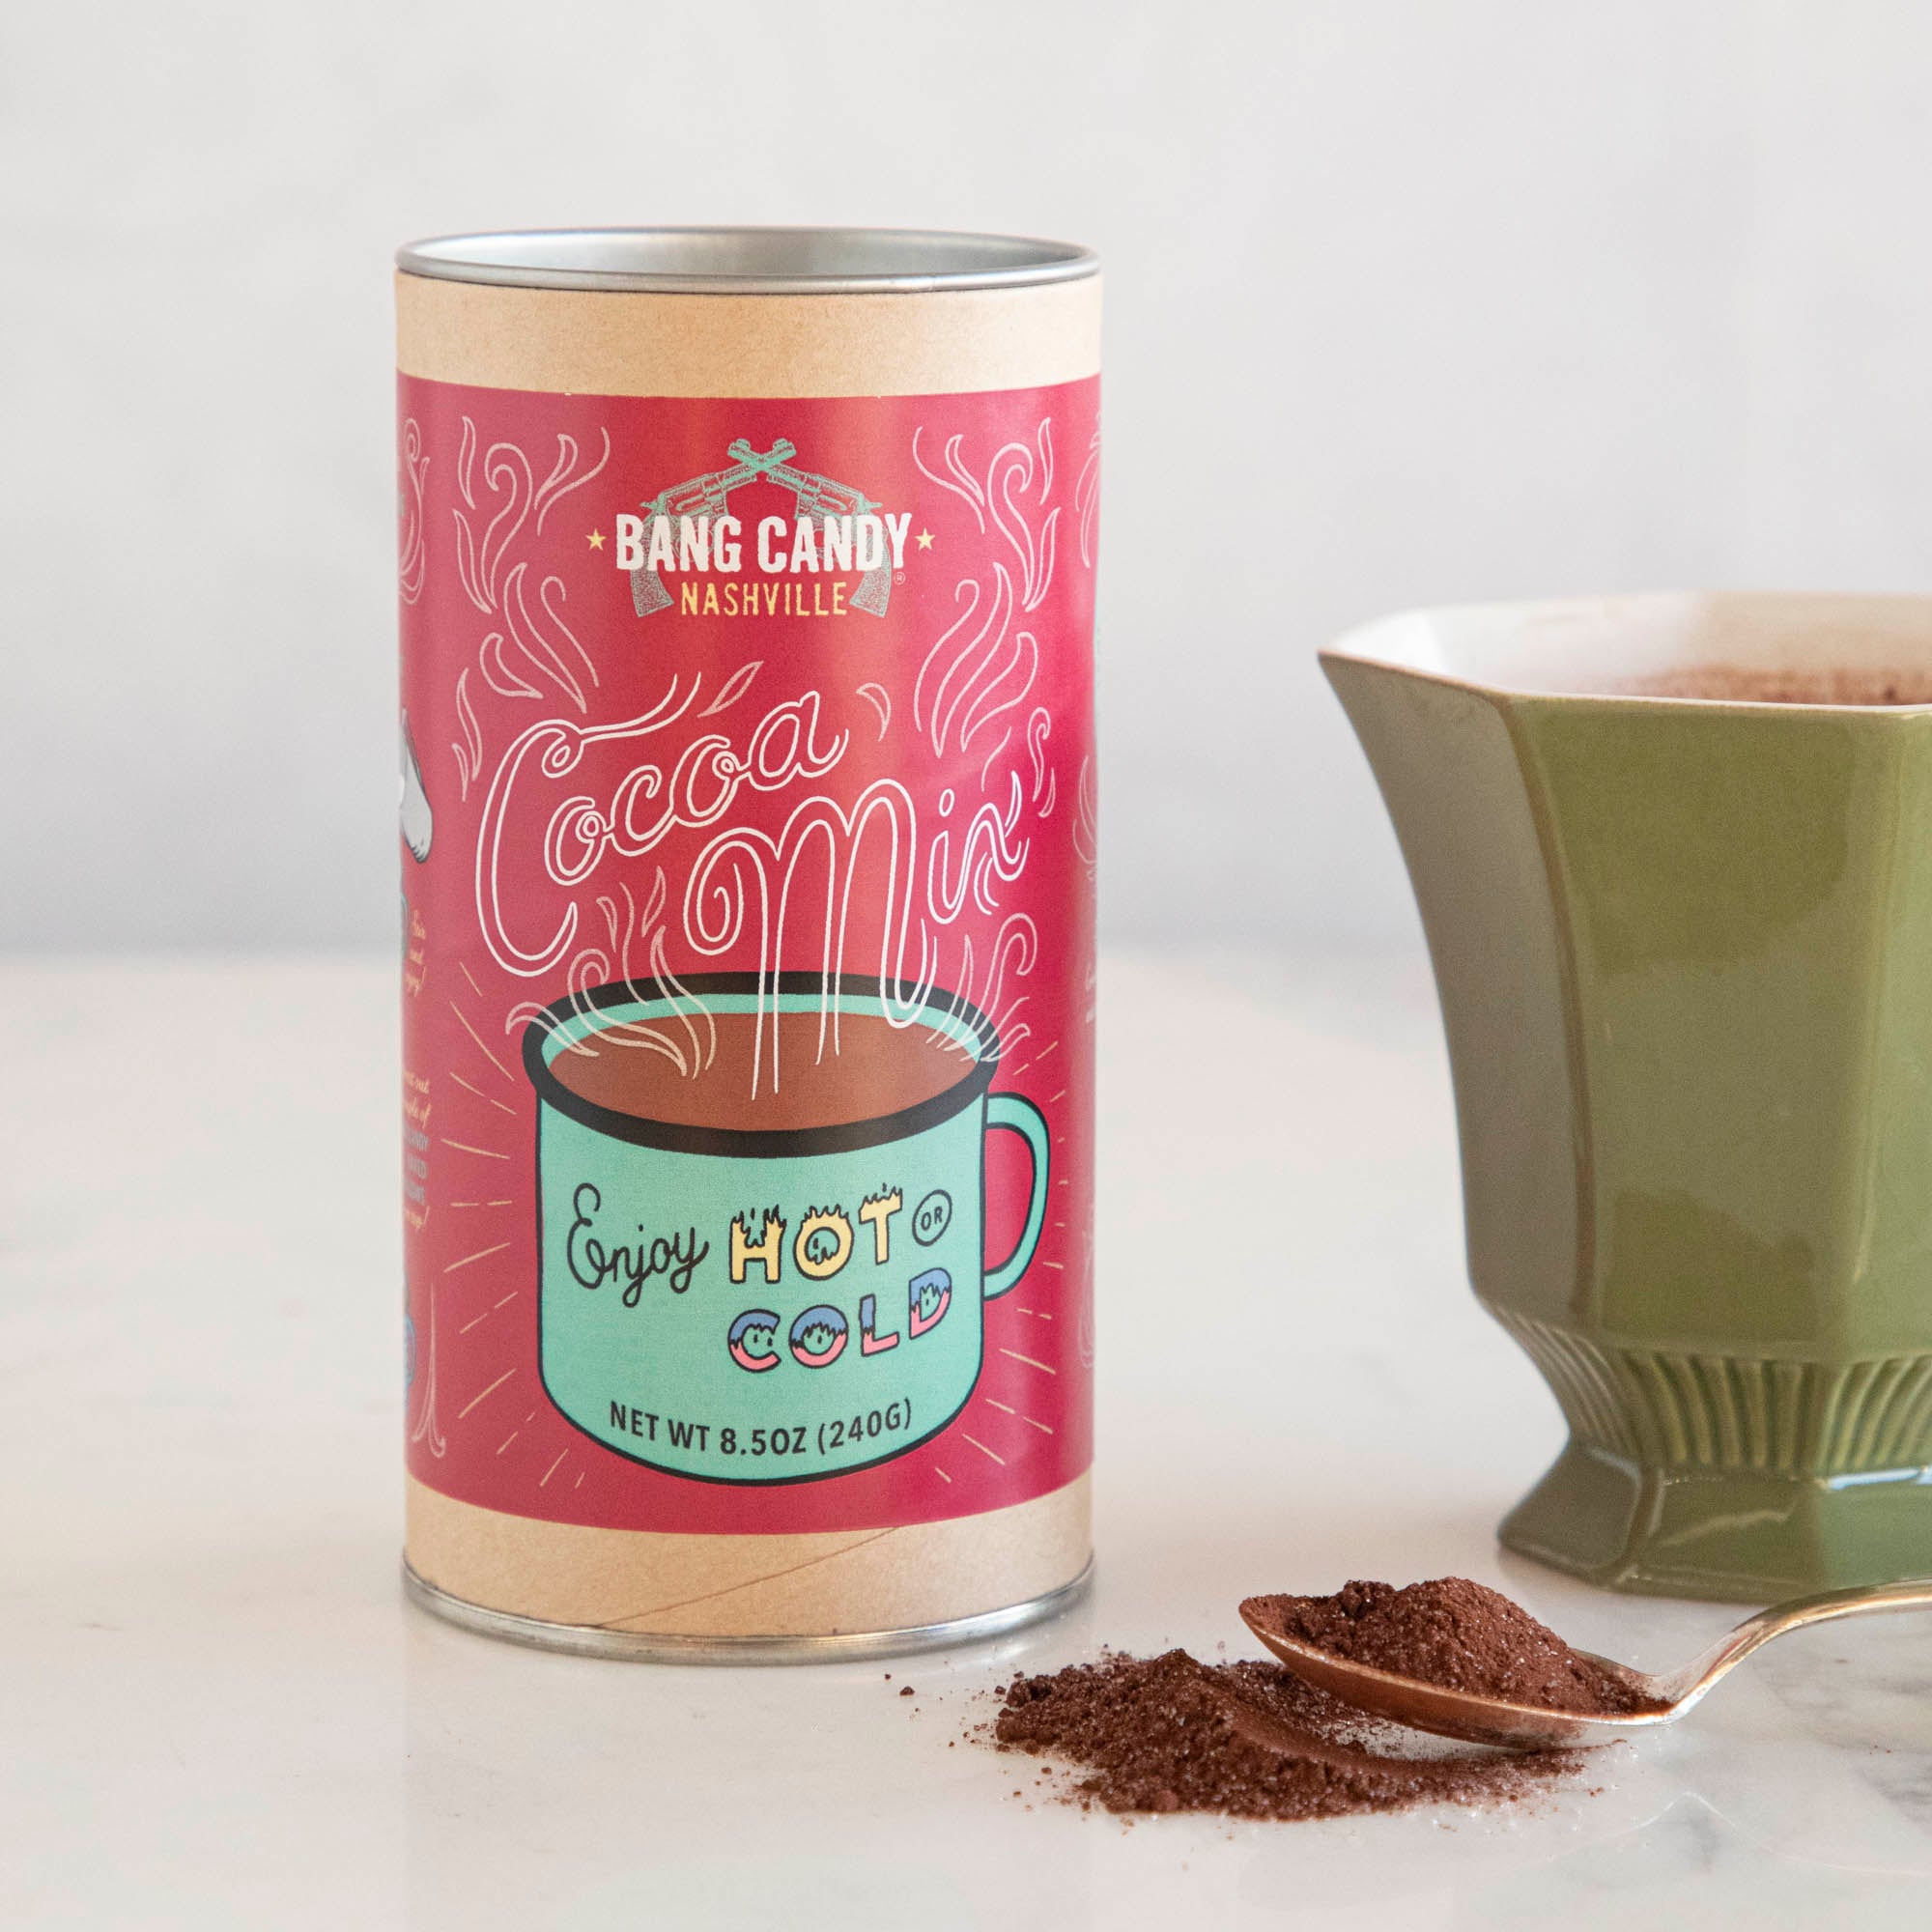 A tin of the popular Hester &amp; Cook Original Bang Candy Hot Cocoa Mix is positioned next to a steaming cup of coffee. The irresistible aroma and rich dark chocolate flavor of this hot cocoa mix make it the perfect